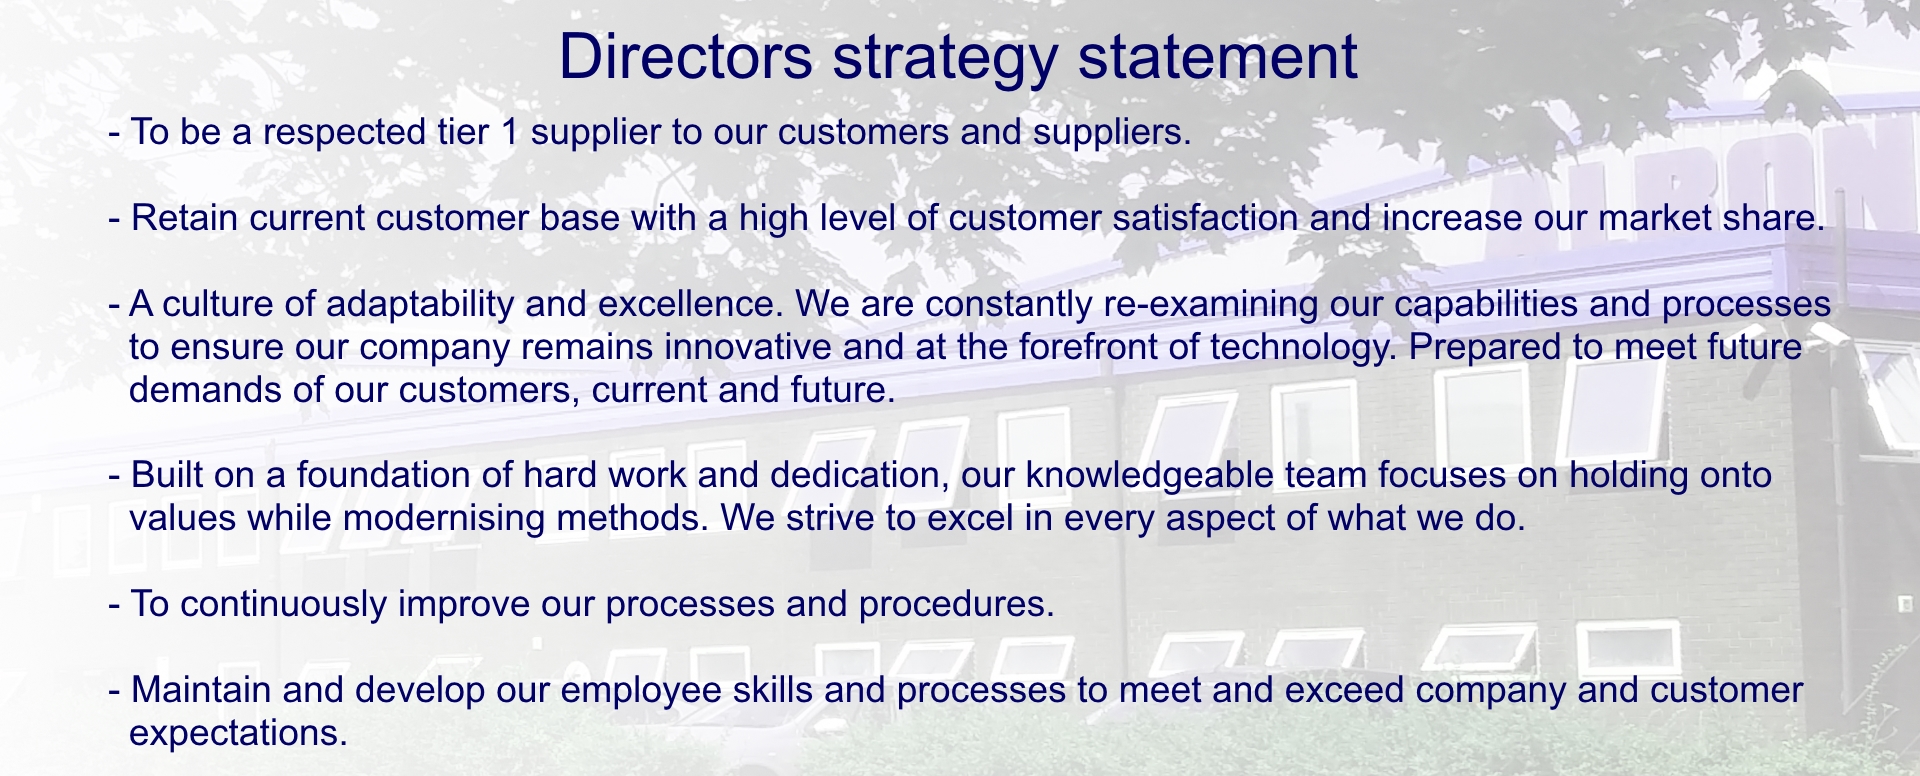 Directors Strategy Statement HomePage At the very bottom